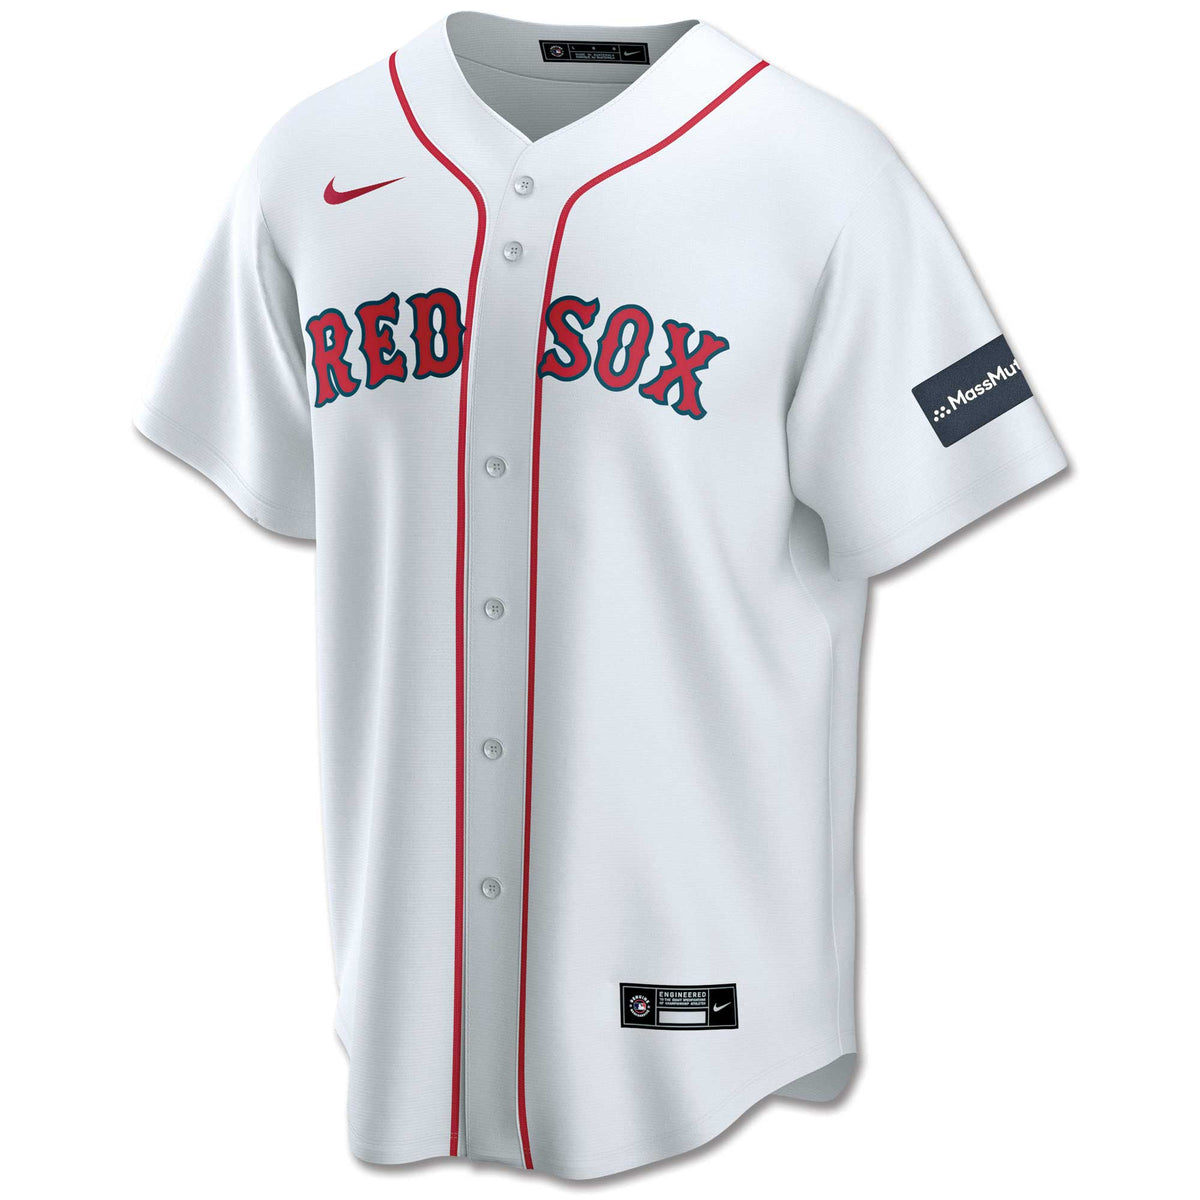 The MassMutual jersey patch is displayed during a Boston Red Sox